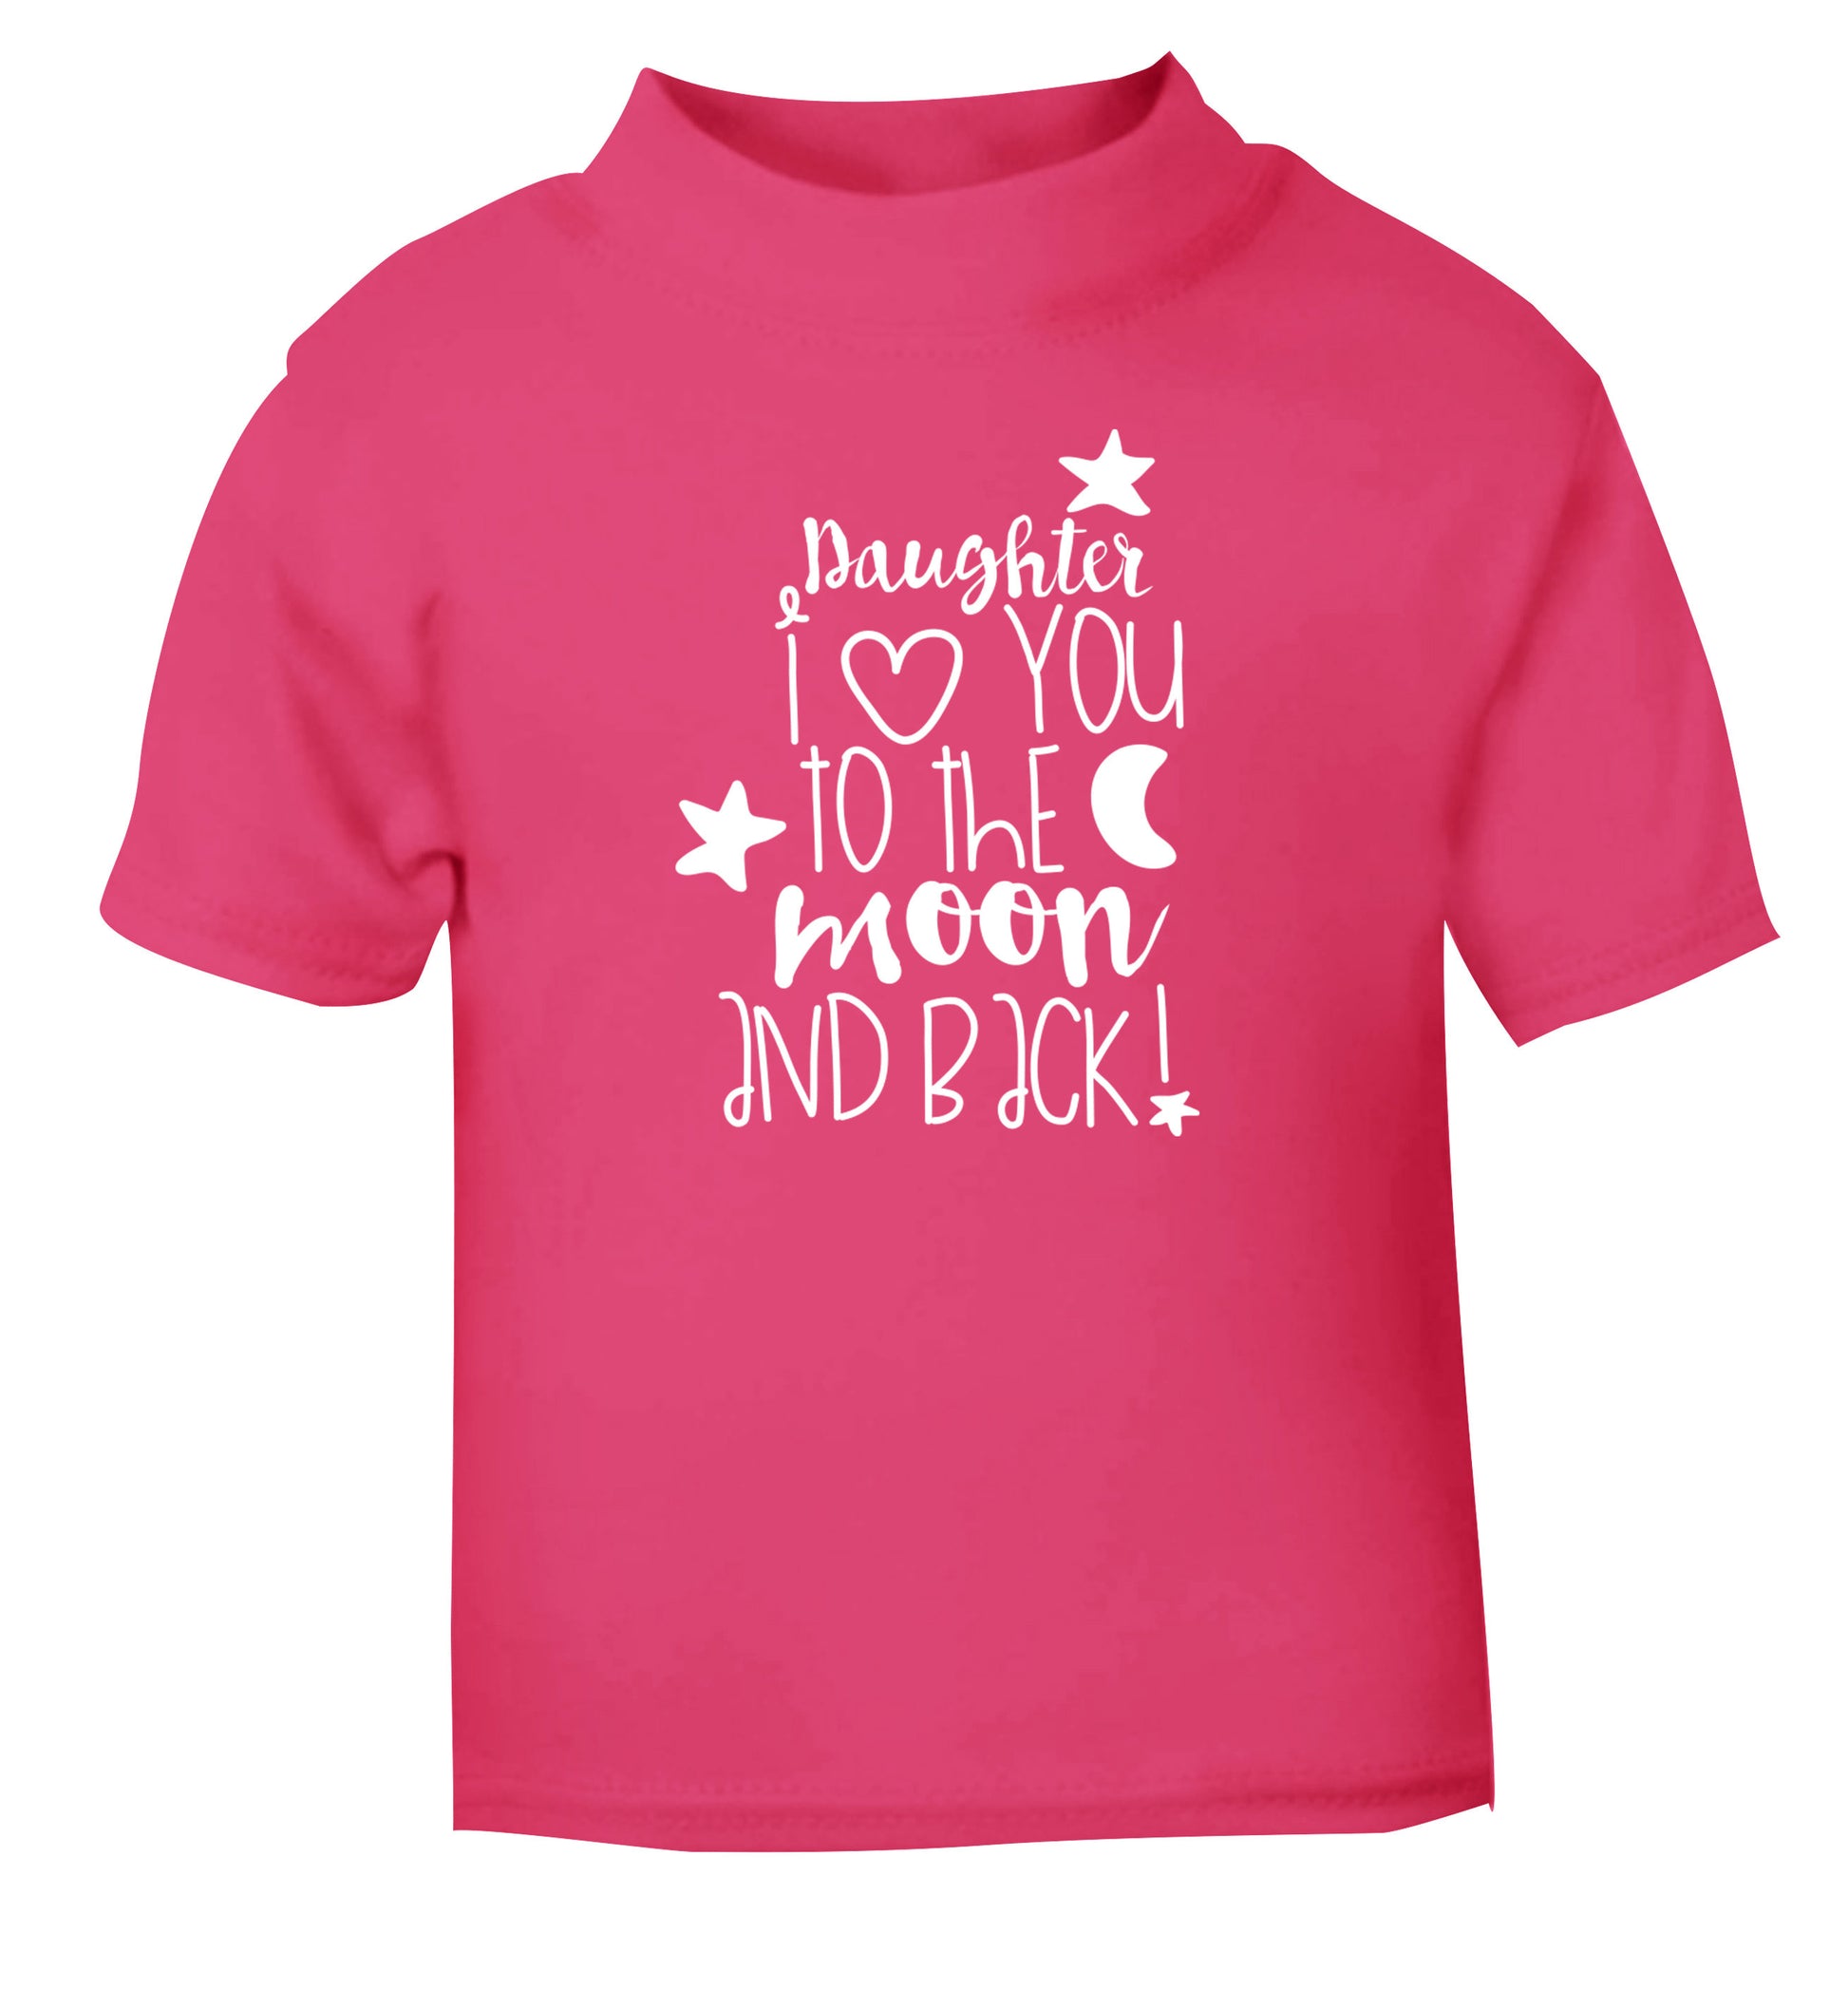 Daughter I love you to the moon and back pink Baby Toddler Tshirt 2 Years